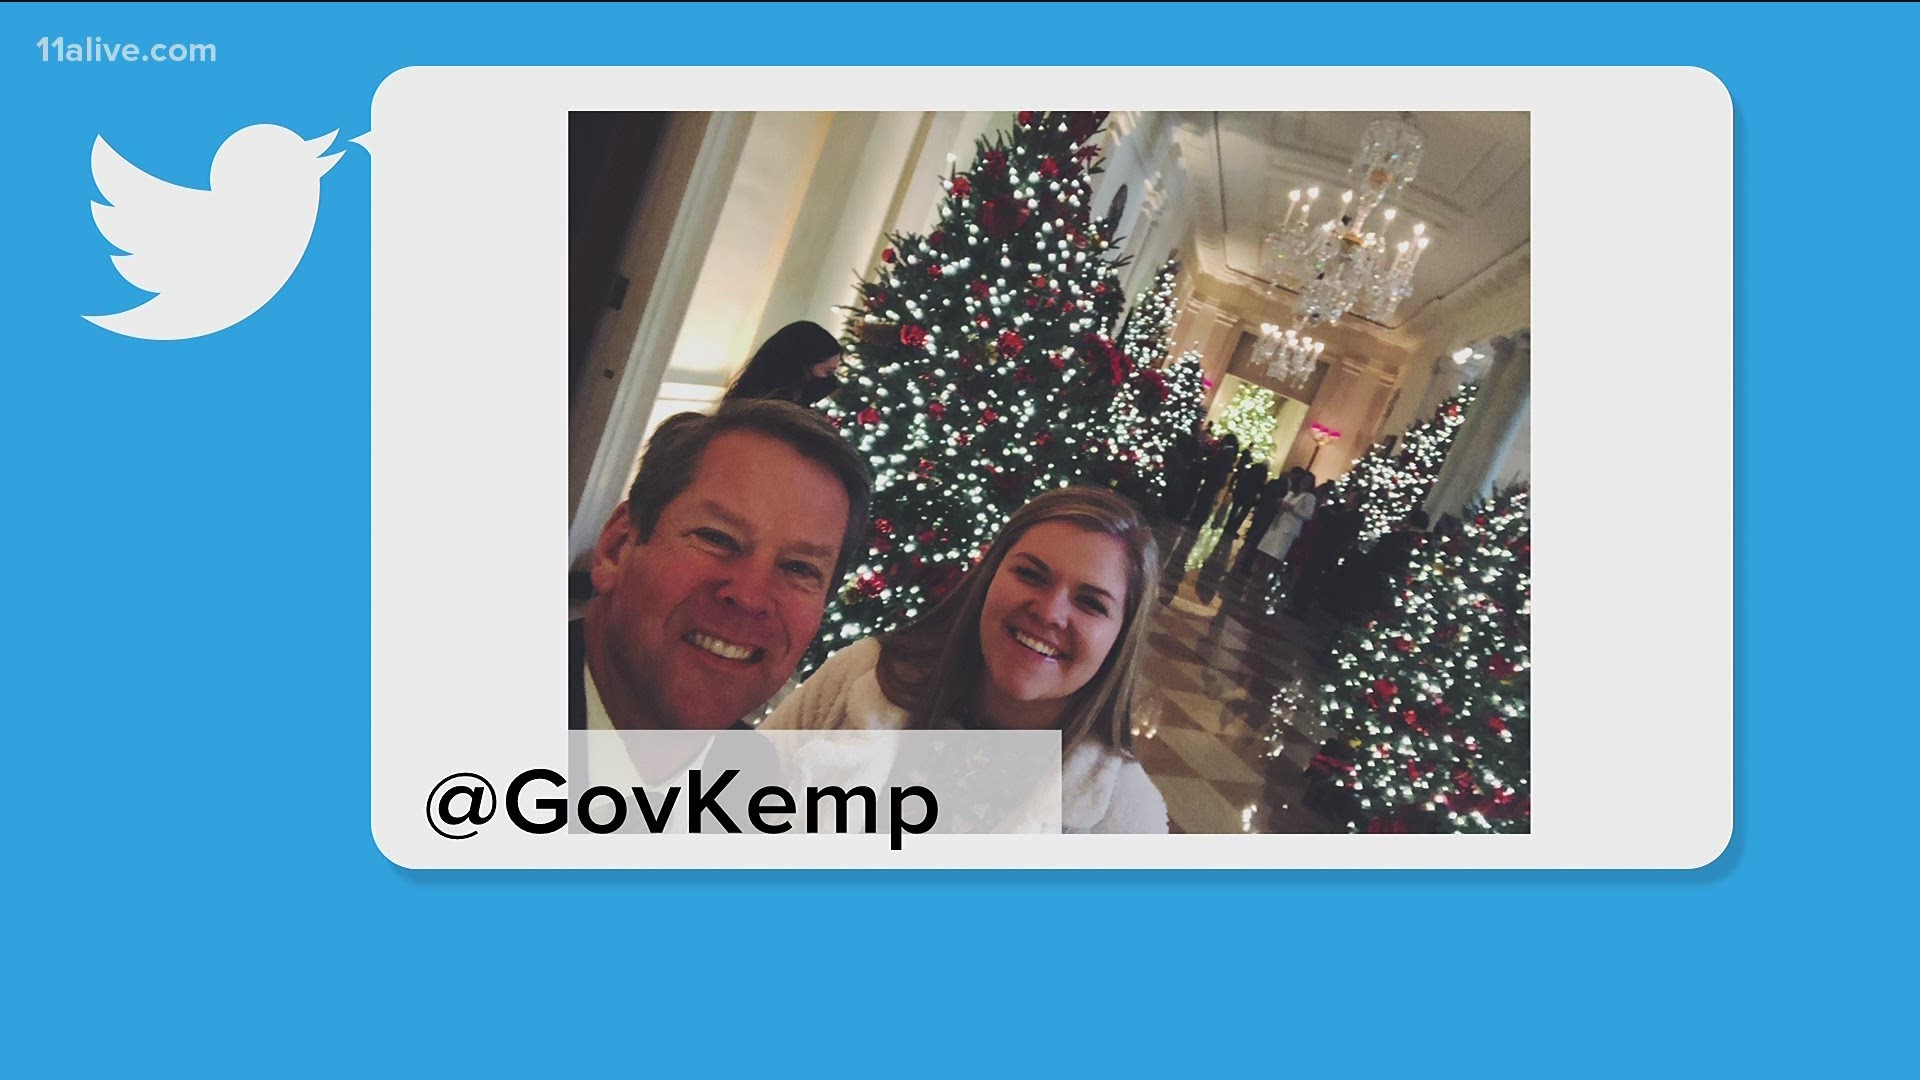 The governor tweeted out a photo from the party in Washington on Friday night.